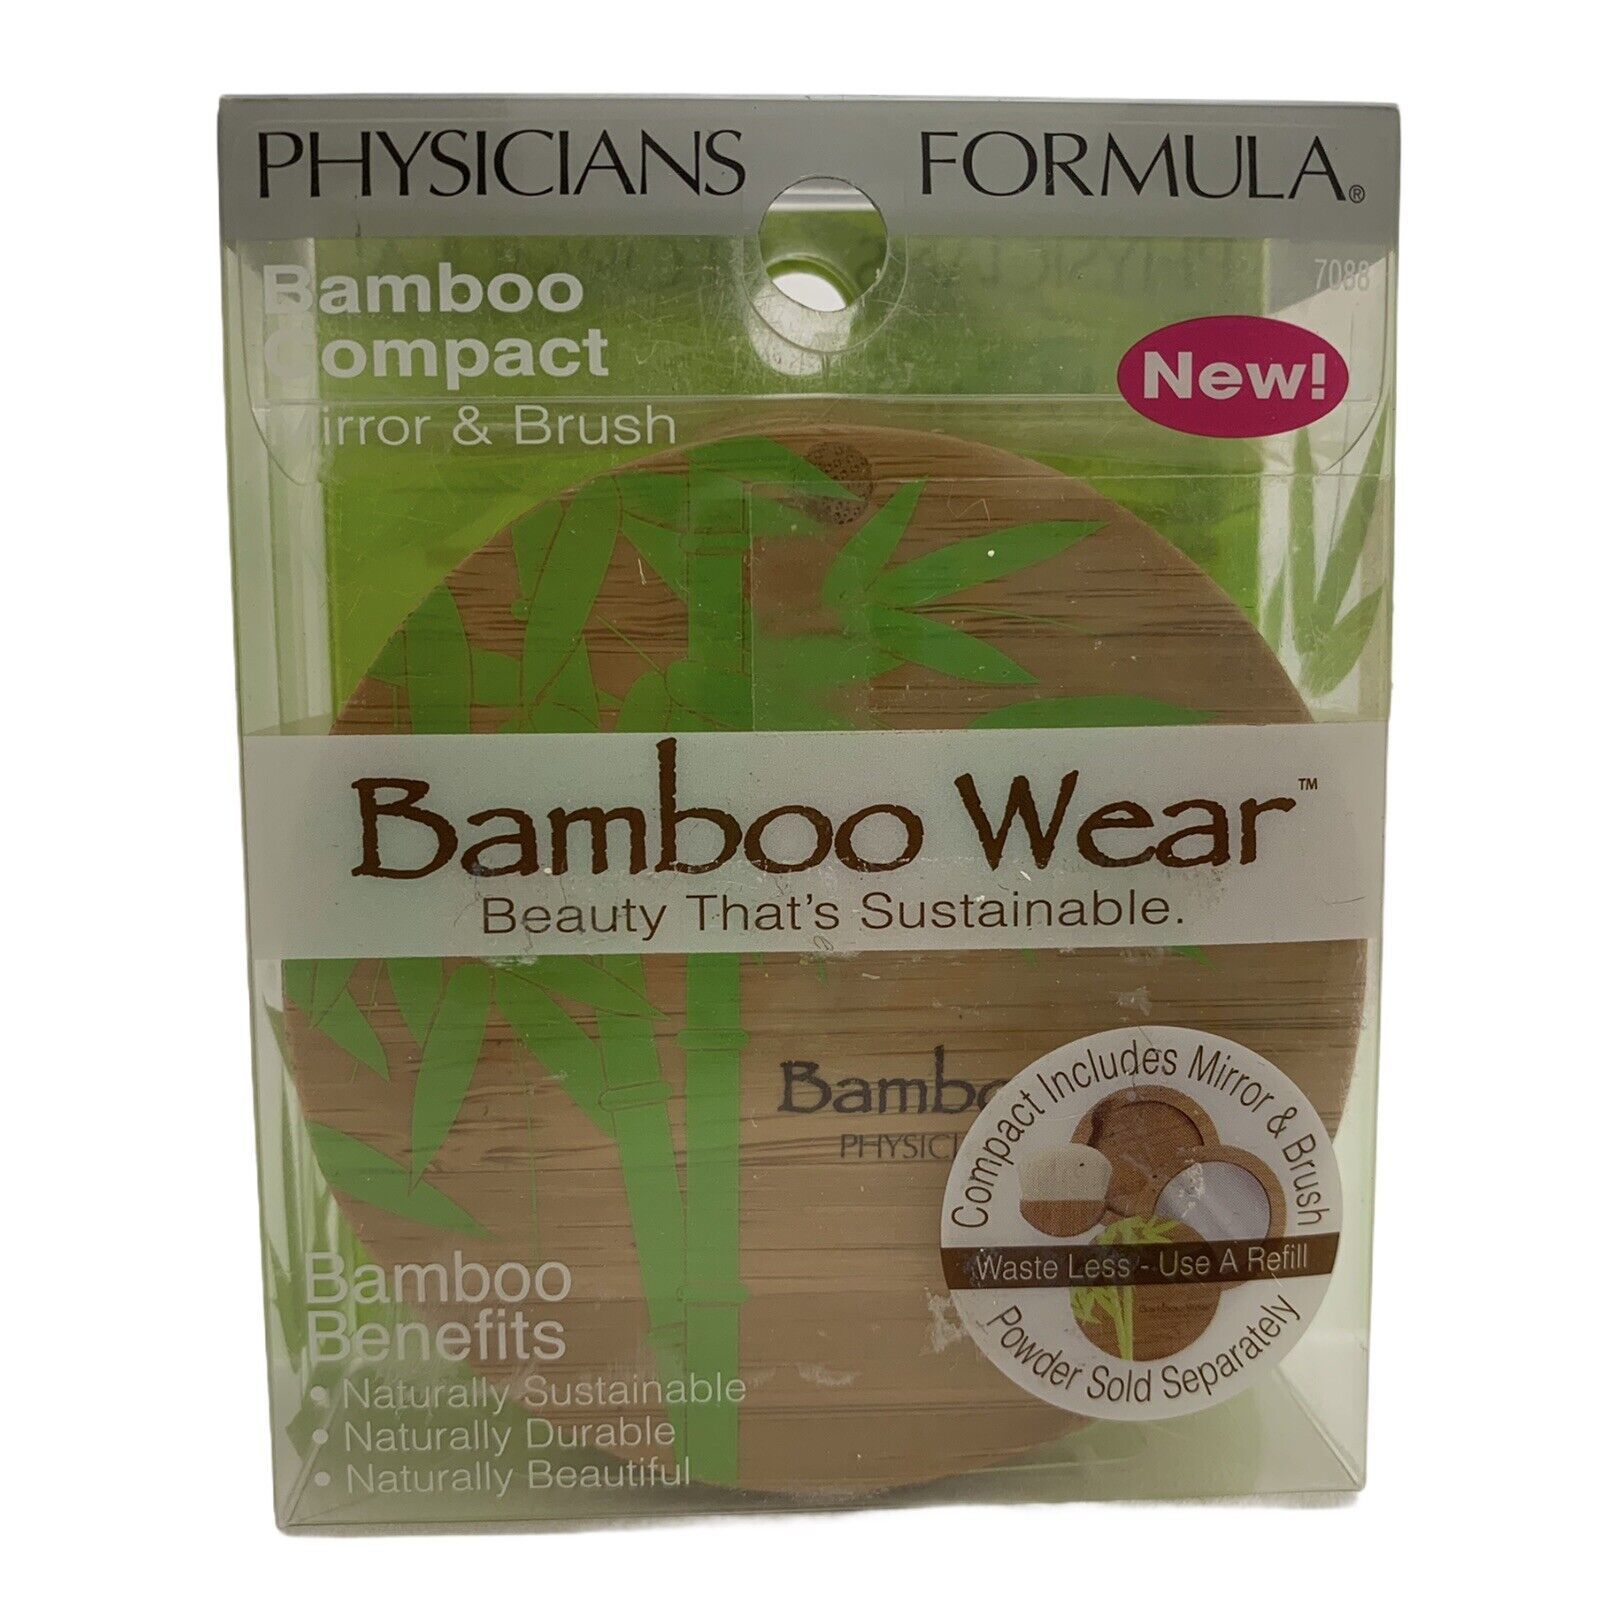 Physicians Formula Bamboo Compact with Mirror And Brush Only NEW IN BOX - $9.89